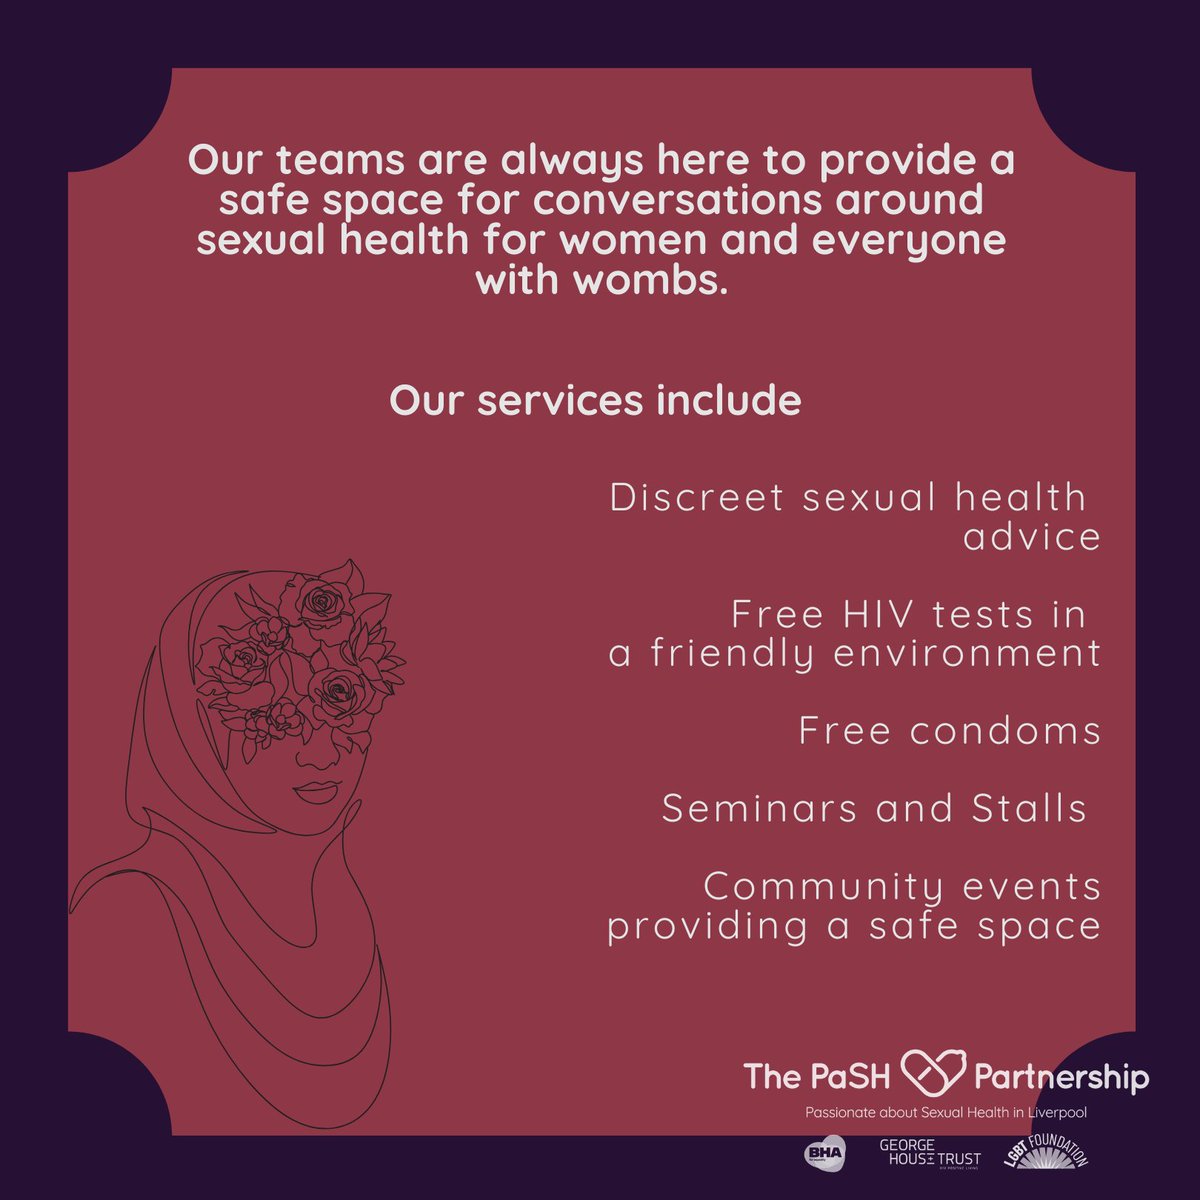 Today we celebrate international Women's Day! We are dedicated to stand up for women and emphasise the intersections of their experiences. @gmpash @pashinliverpool #sexualhealth #hivprevention #healthjustice #freecondoms #reproductivehealth #liverpoolhealth